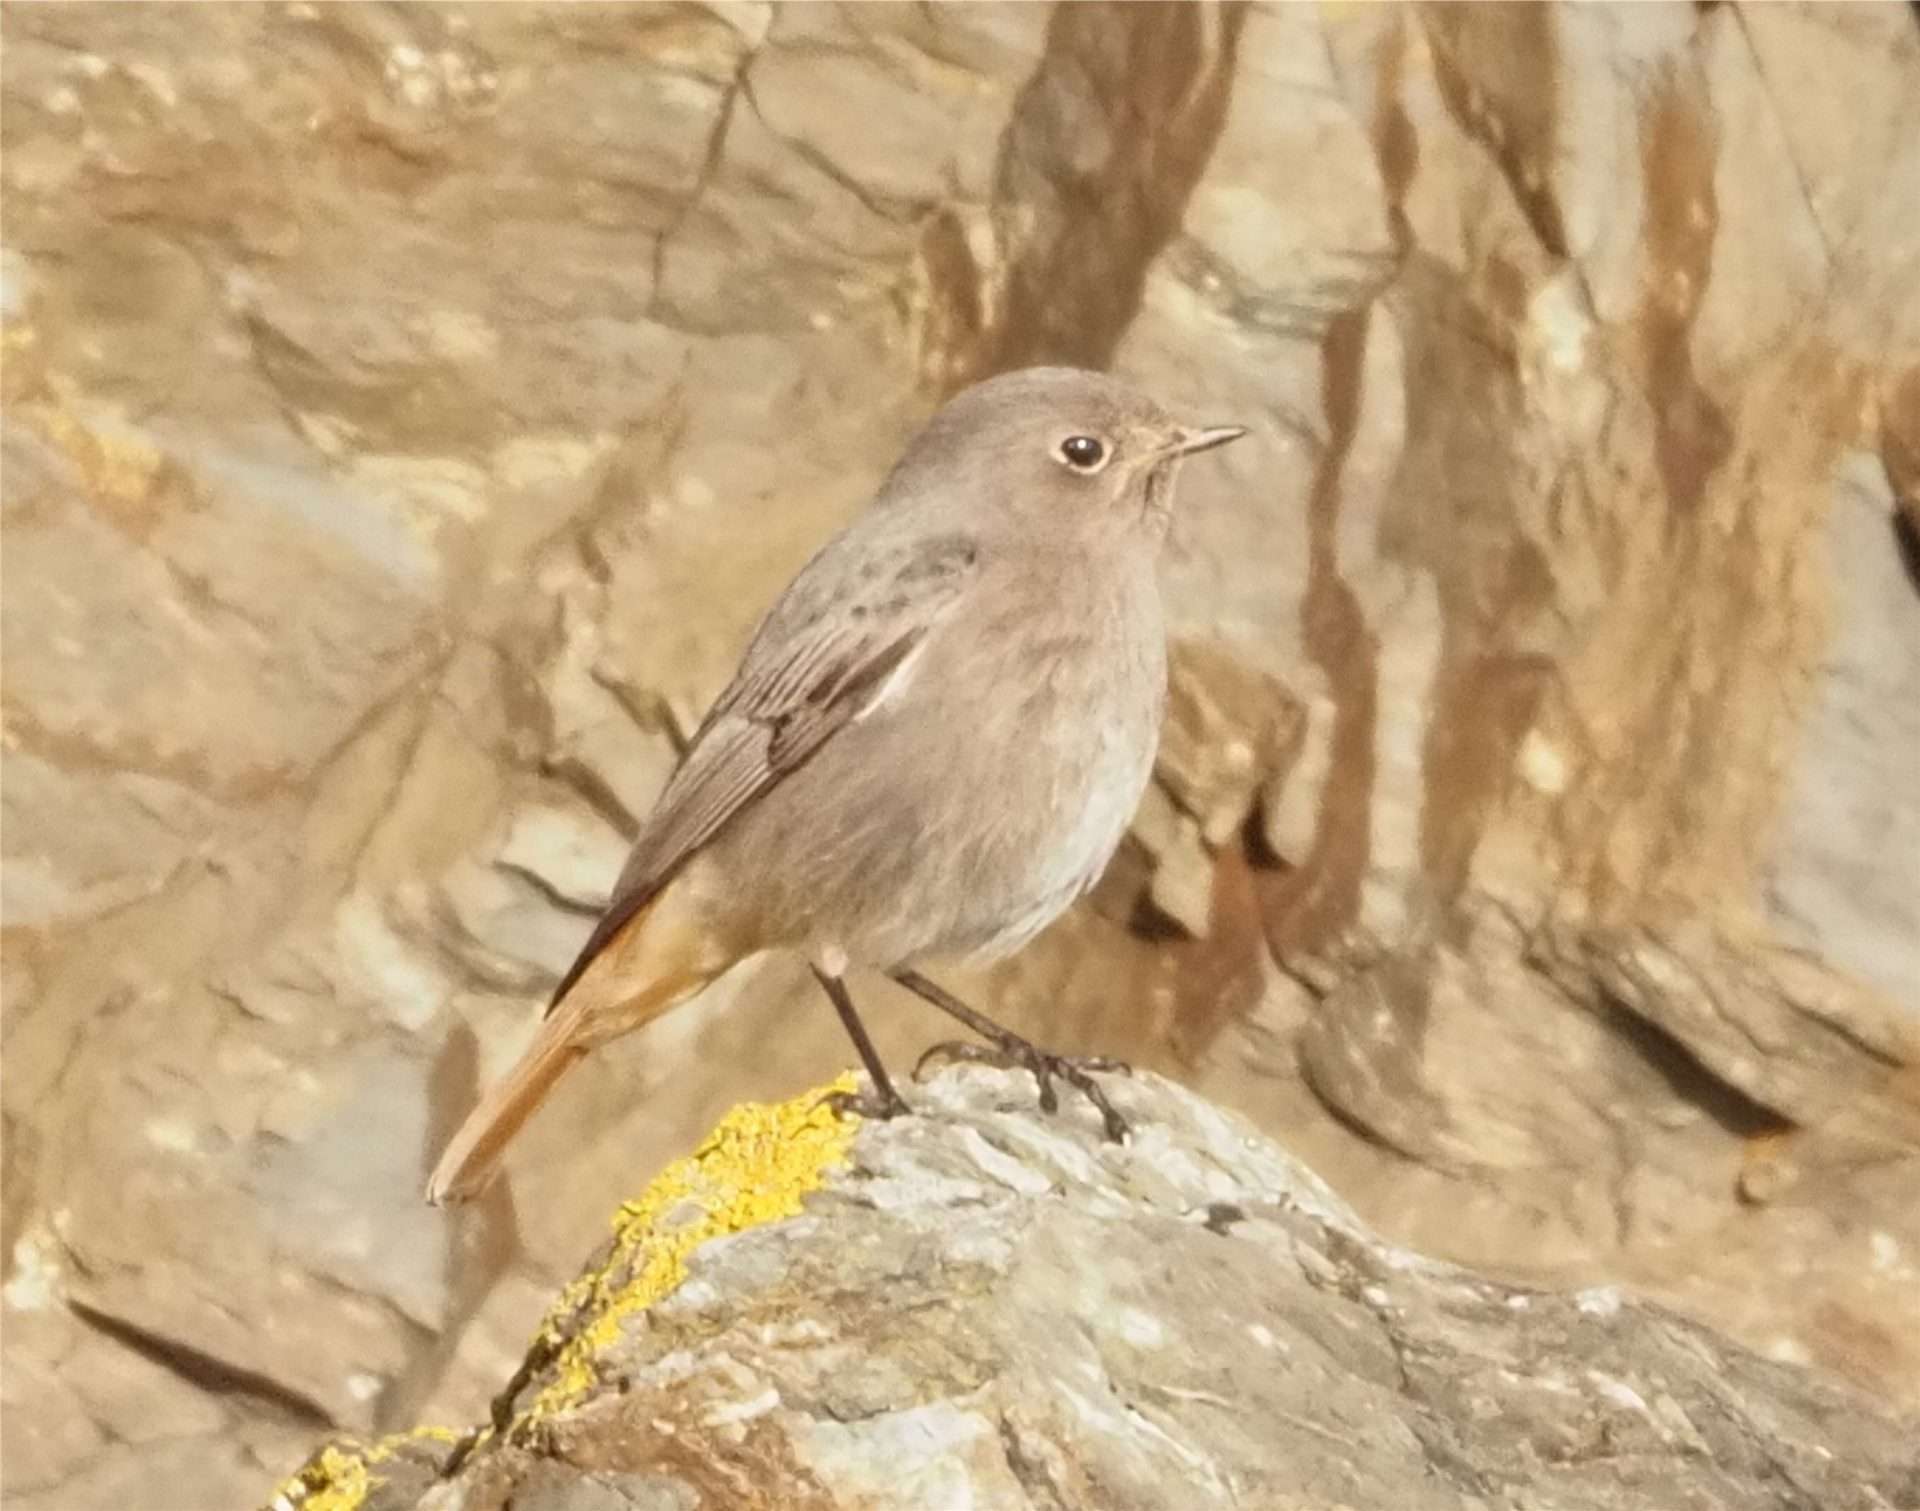 black redstart by mike pound at Hopes nose